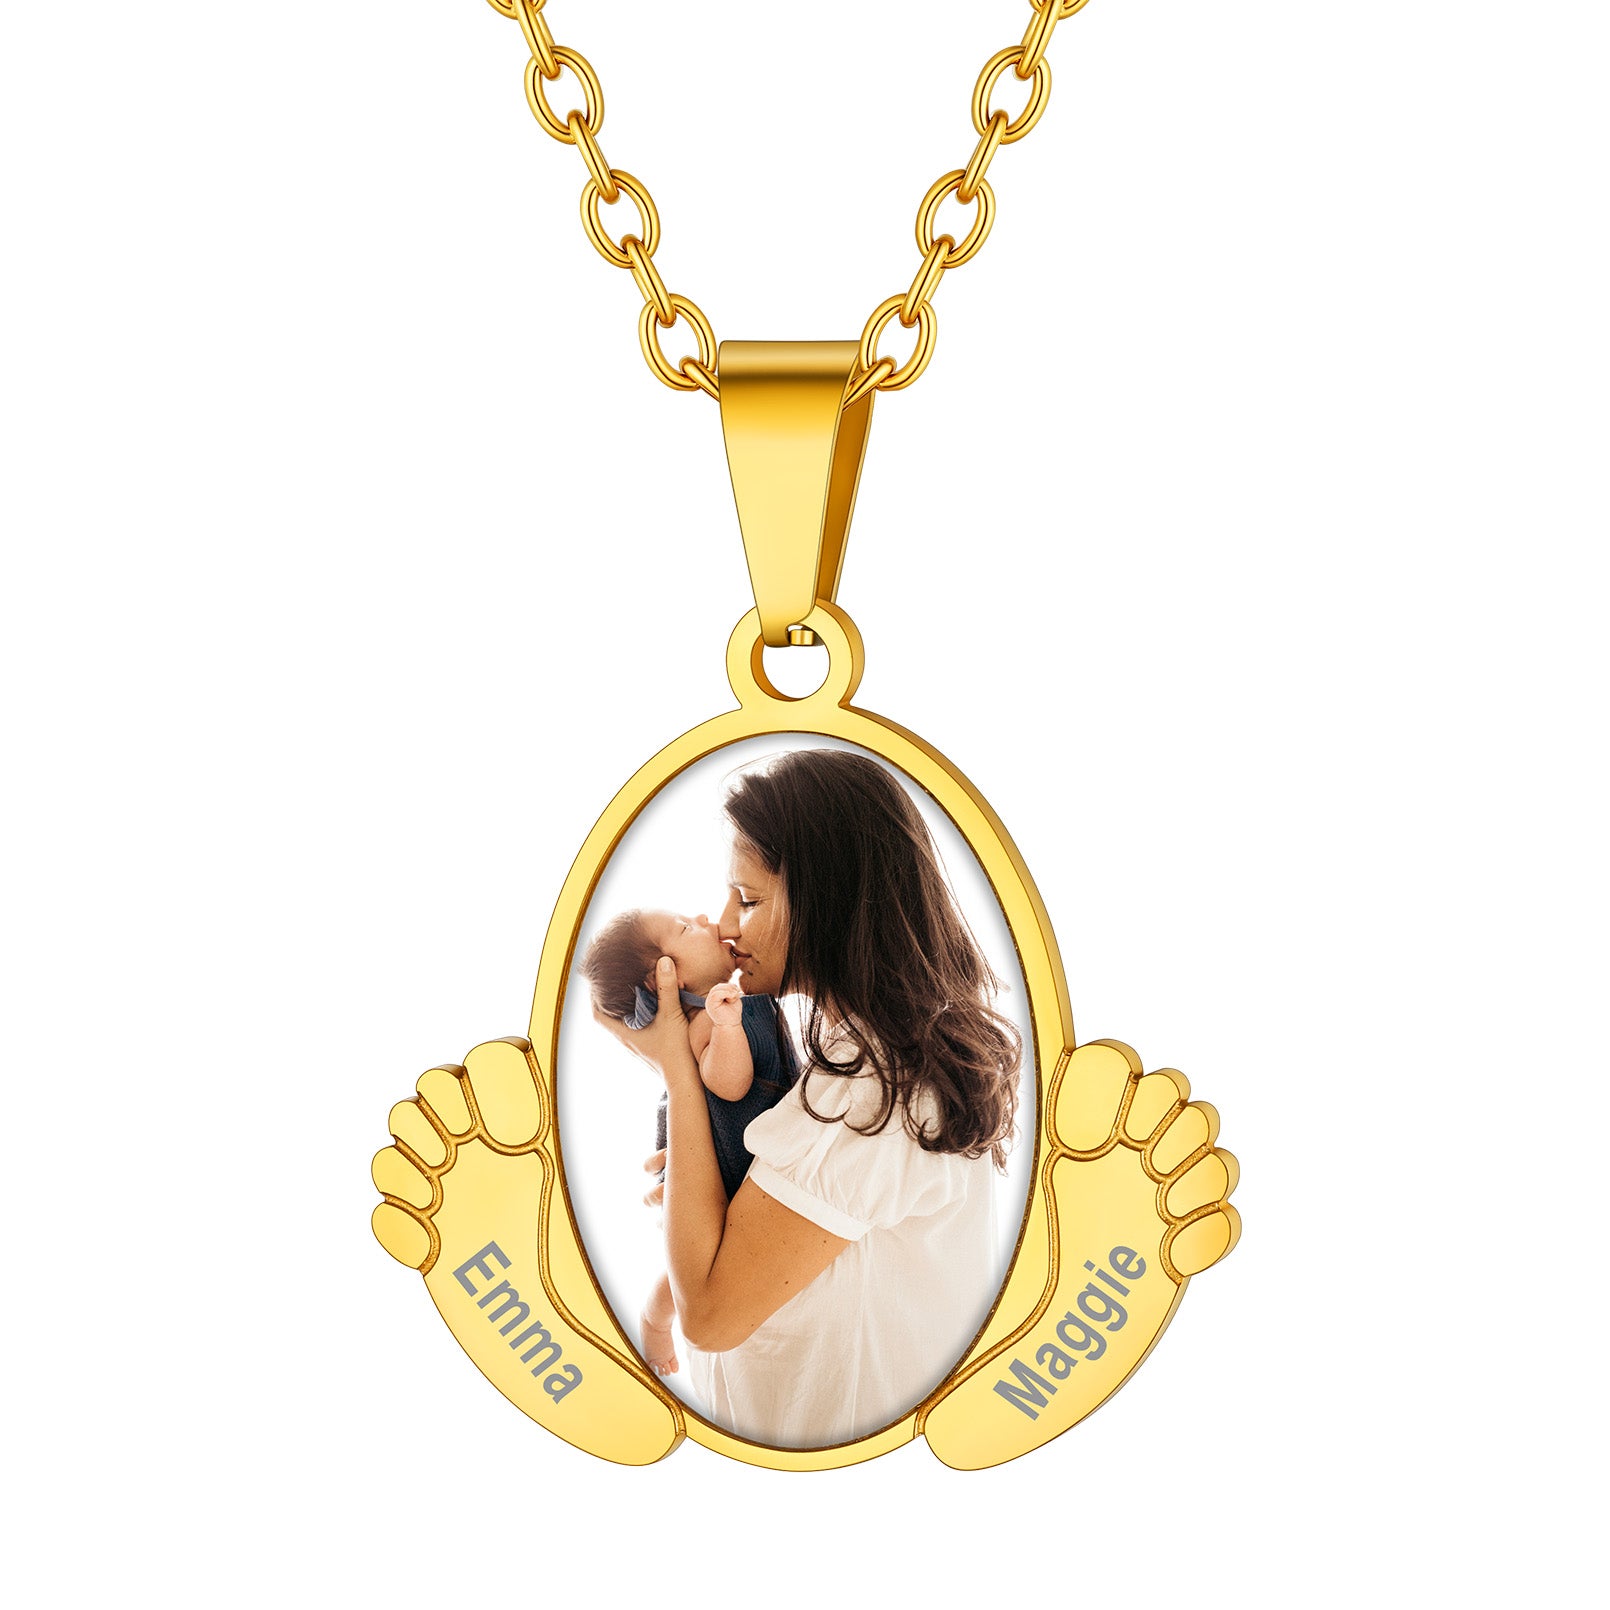  Custom4U Customized Oval Baby Feet Picture Necklace with Name Engraved-Gold Plated